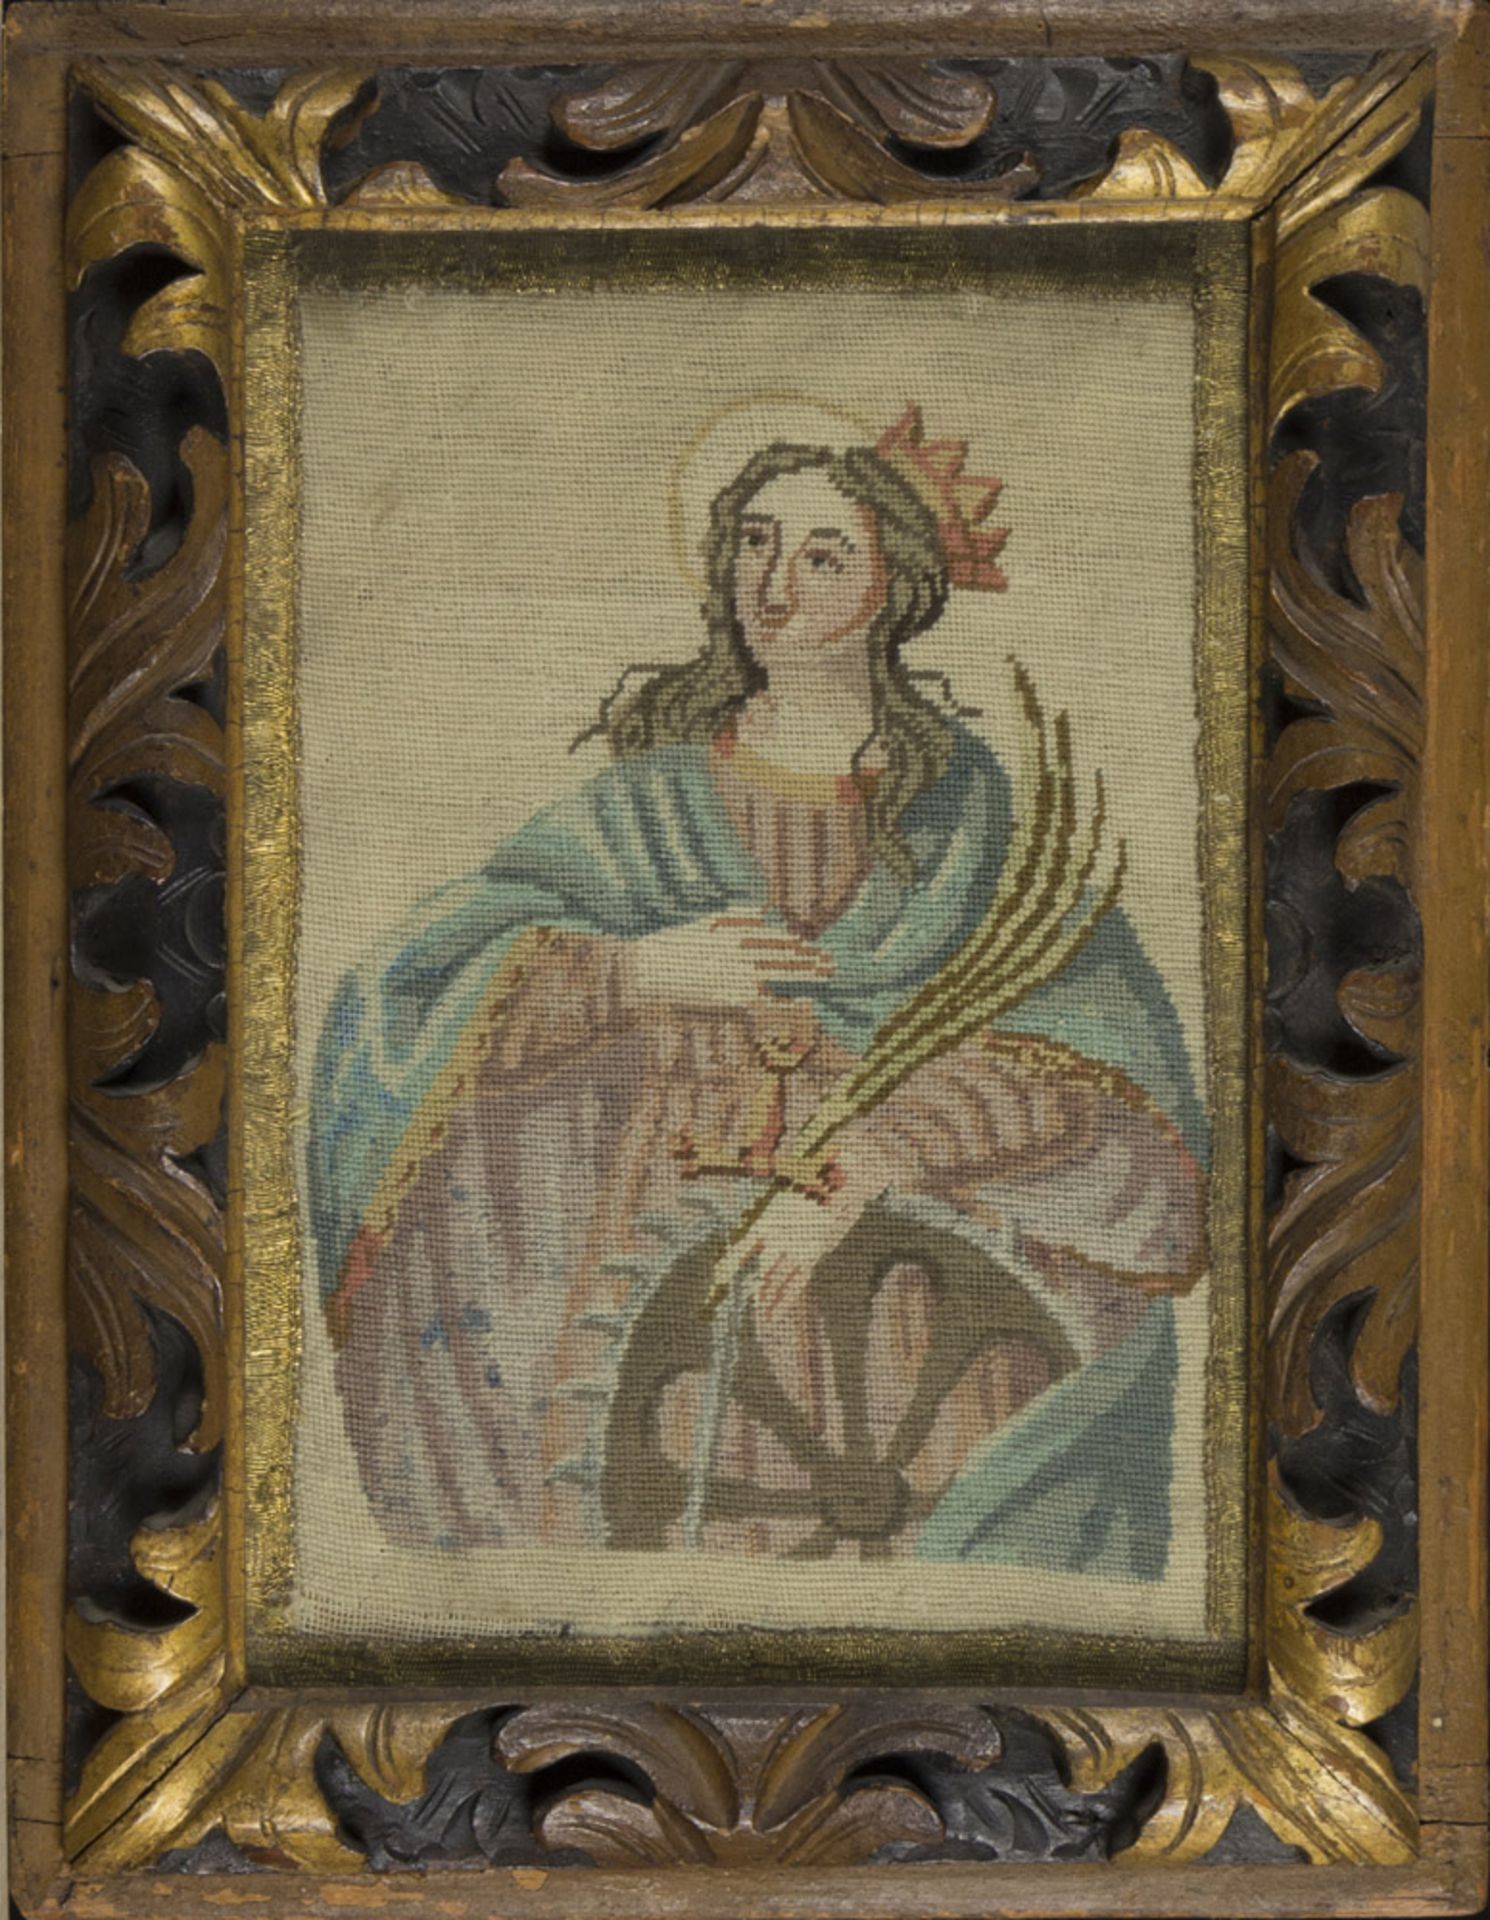 SMALL TAPESTRY, LATE 18TH CENTURY representing the crowned Virgin Measures cm. 21 x 14. PICCOLO